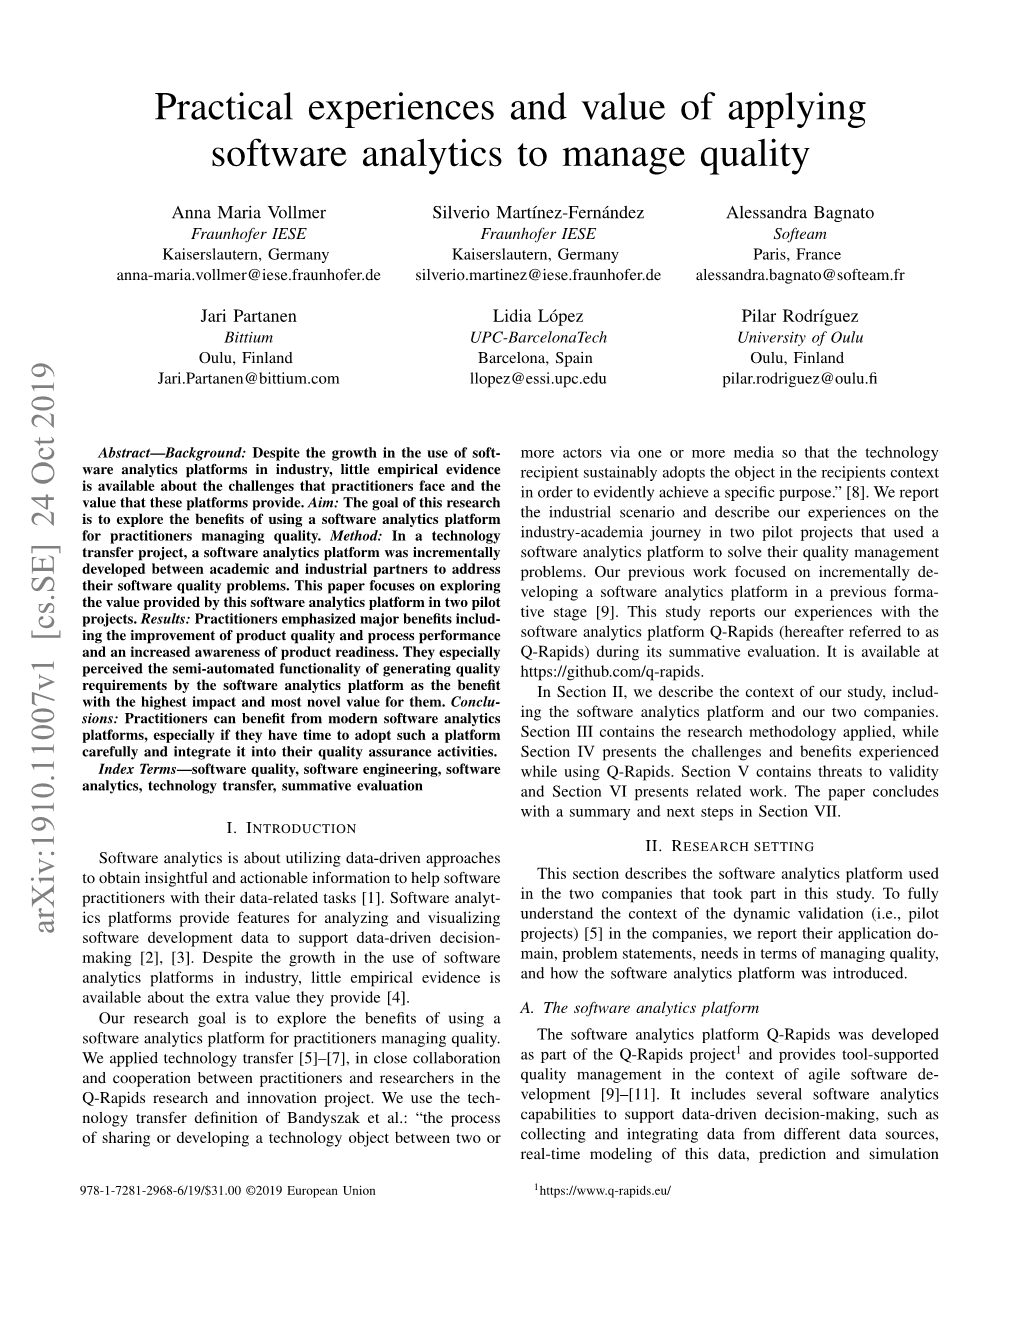 Practical Experiences and Value of Applying Software Analytics to Manage Quality